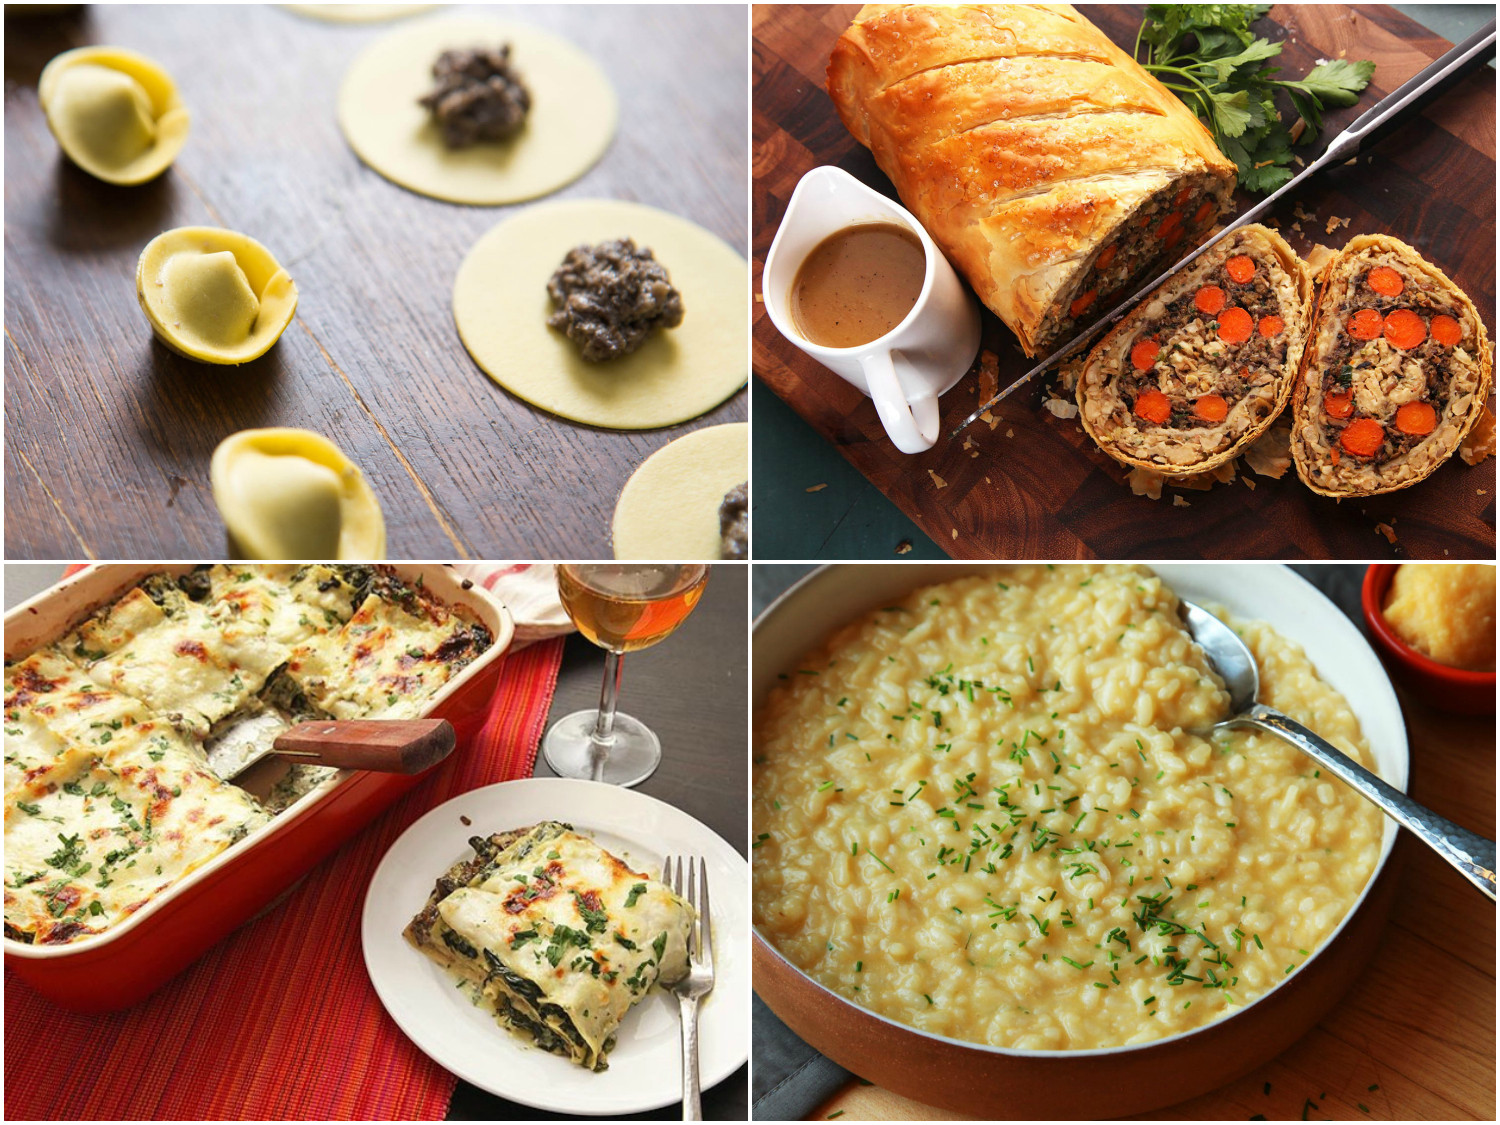 Vegetarian Main Dishes
 13 Festive Ve arian Main Dishes That Even Omnivores Will